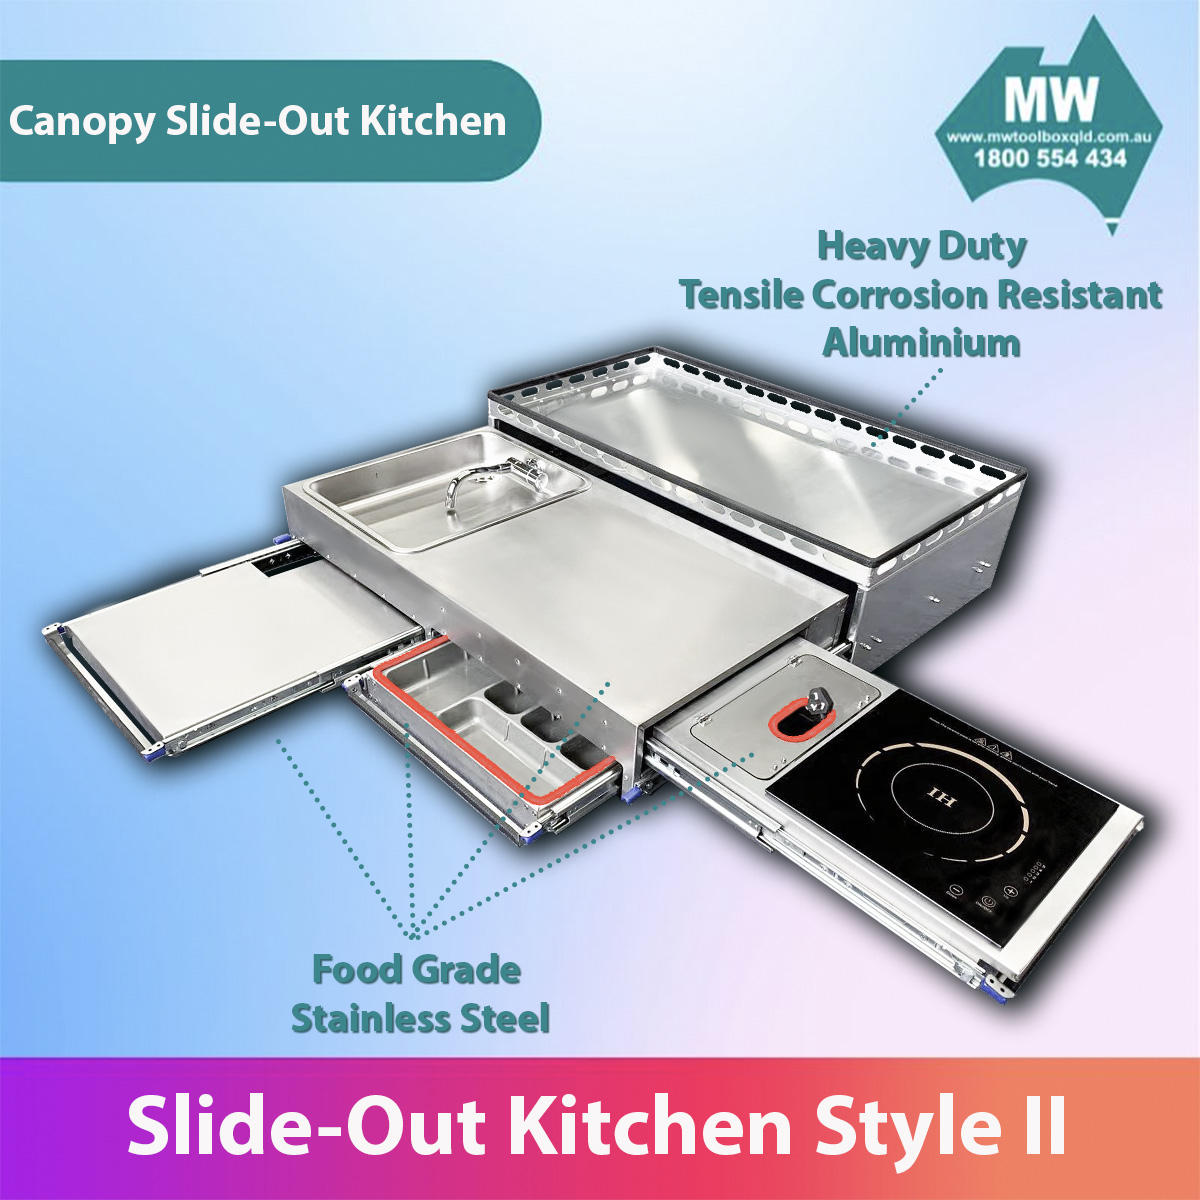 MW SLIDE OUT KITCHEN CANOPY KITCHEN STYLE II-7